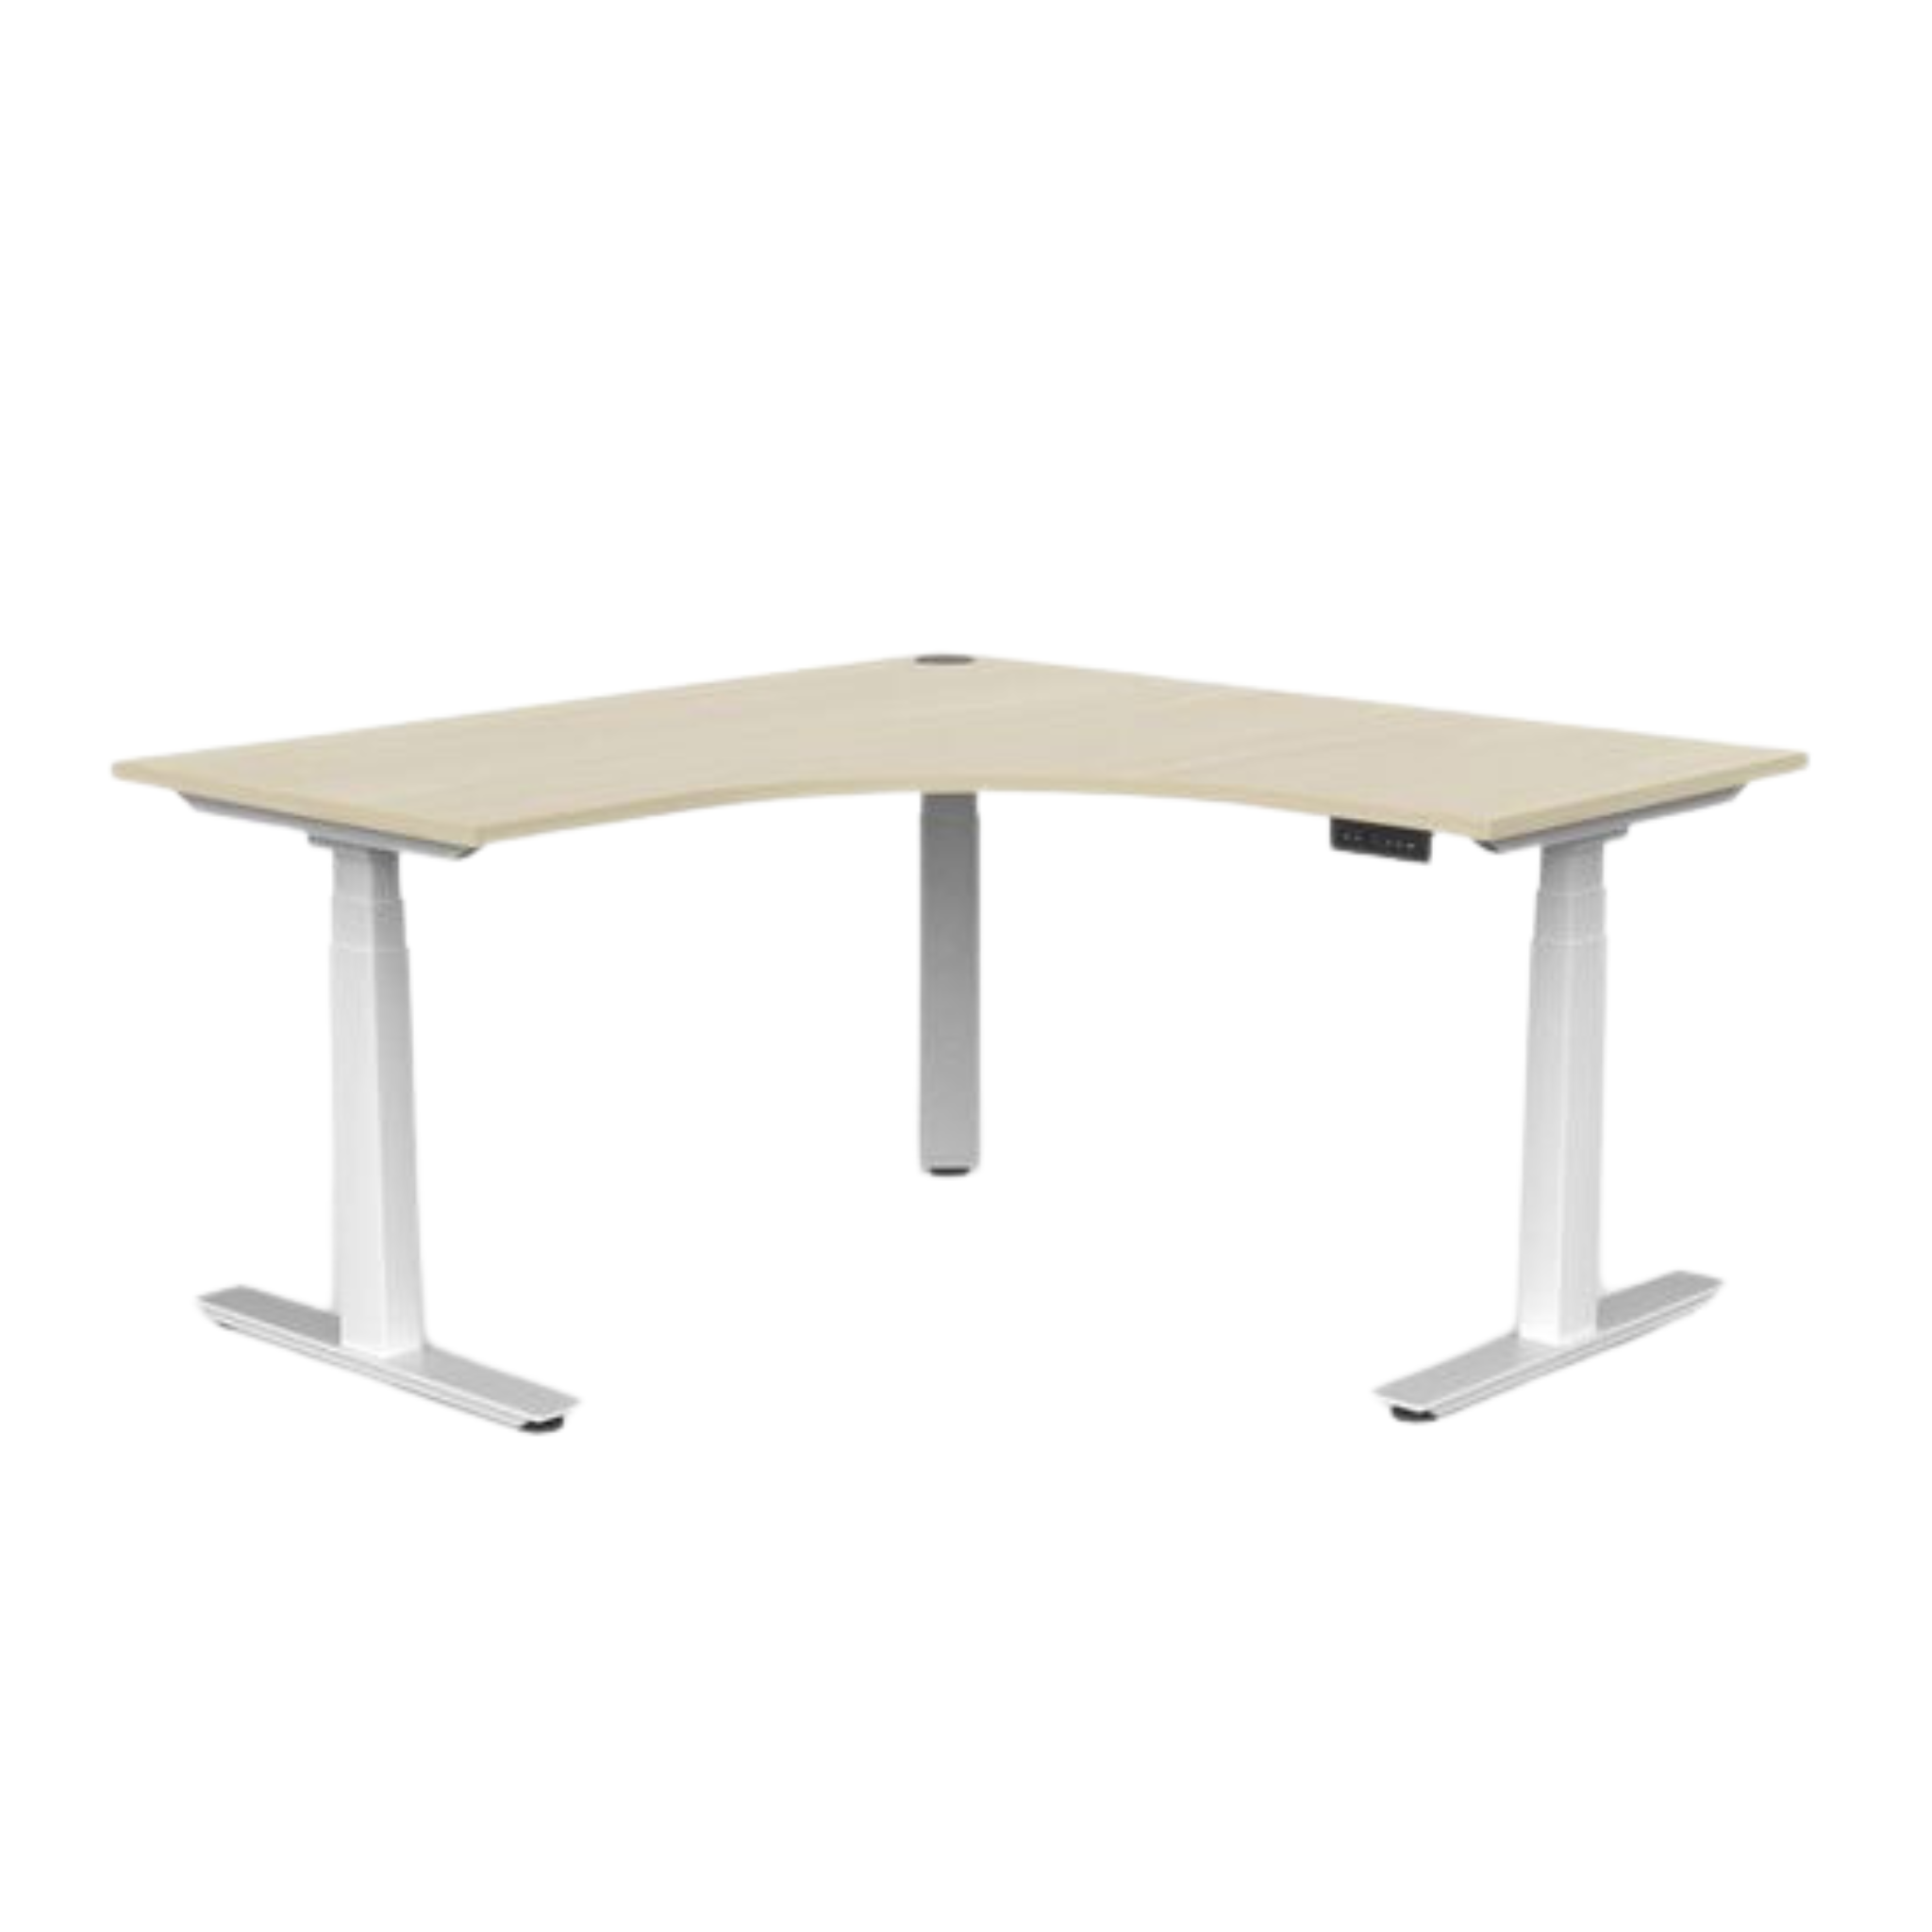 Agile 3 electric sit to stand corner workstation with white frame and nordic maple top